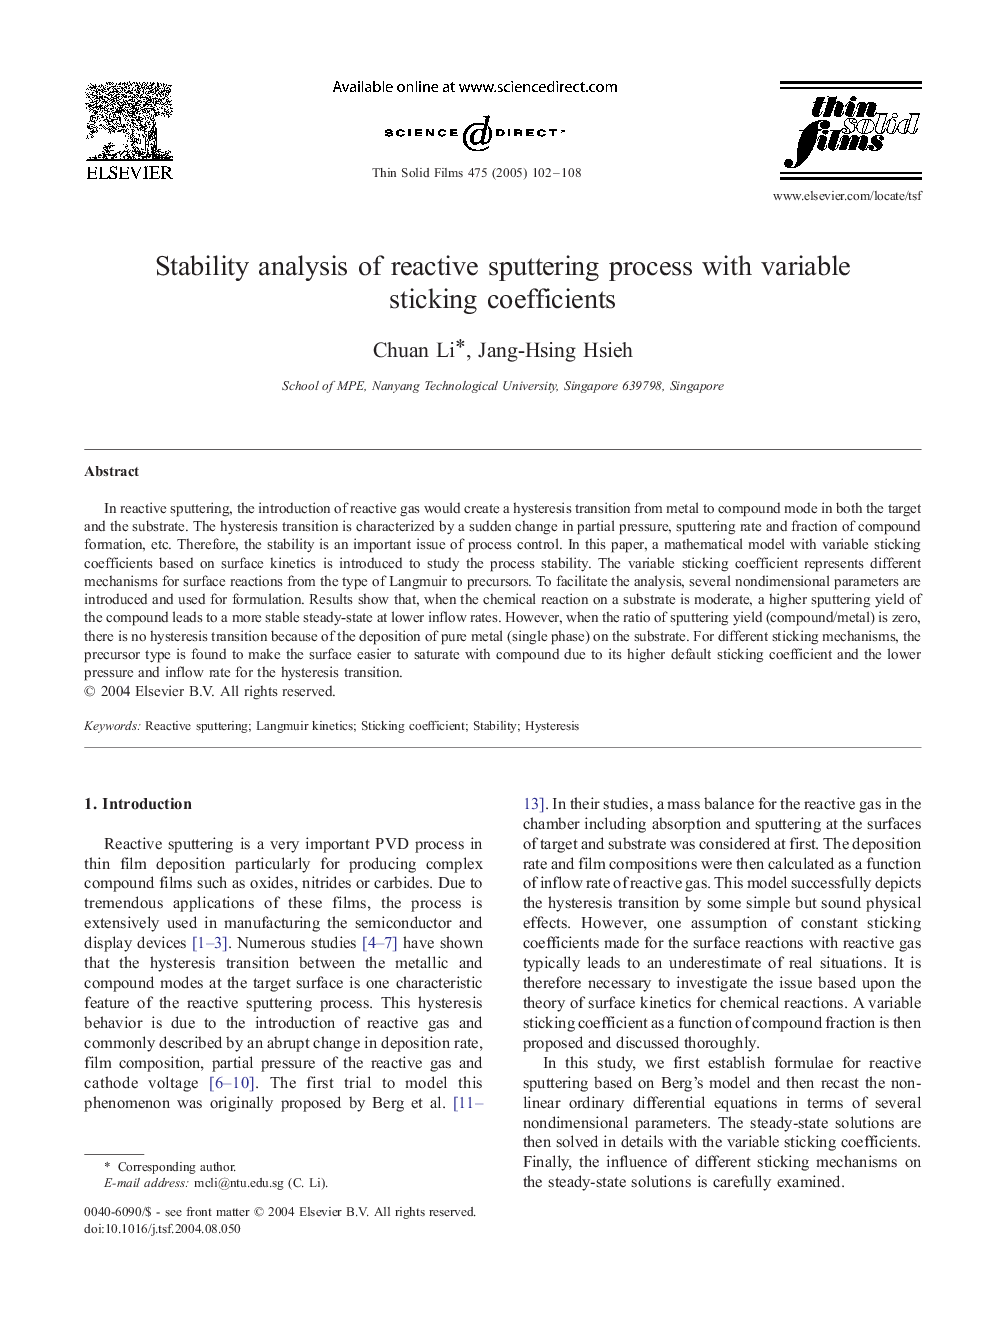 Stability analysis of reactive sputtering process with variable sticking coefficients